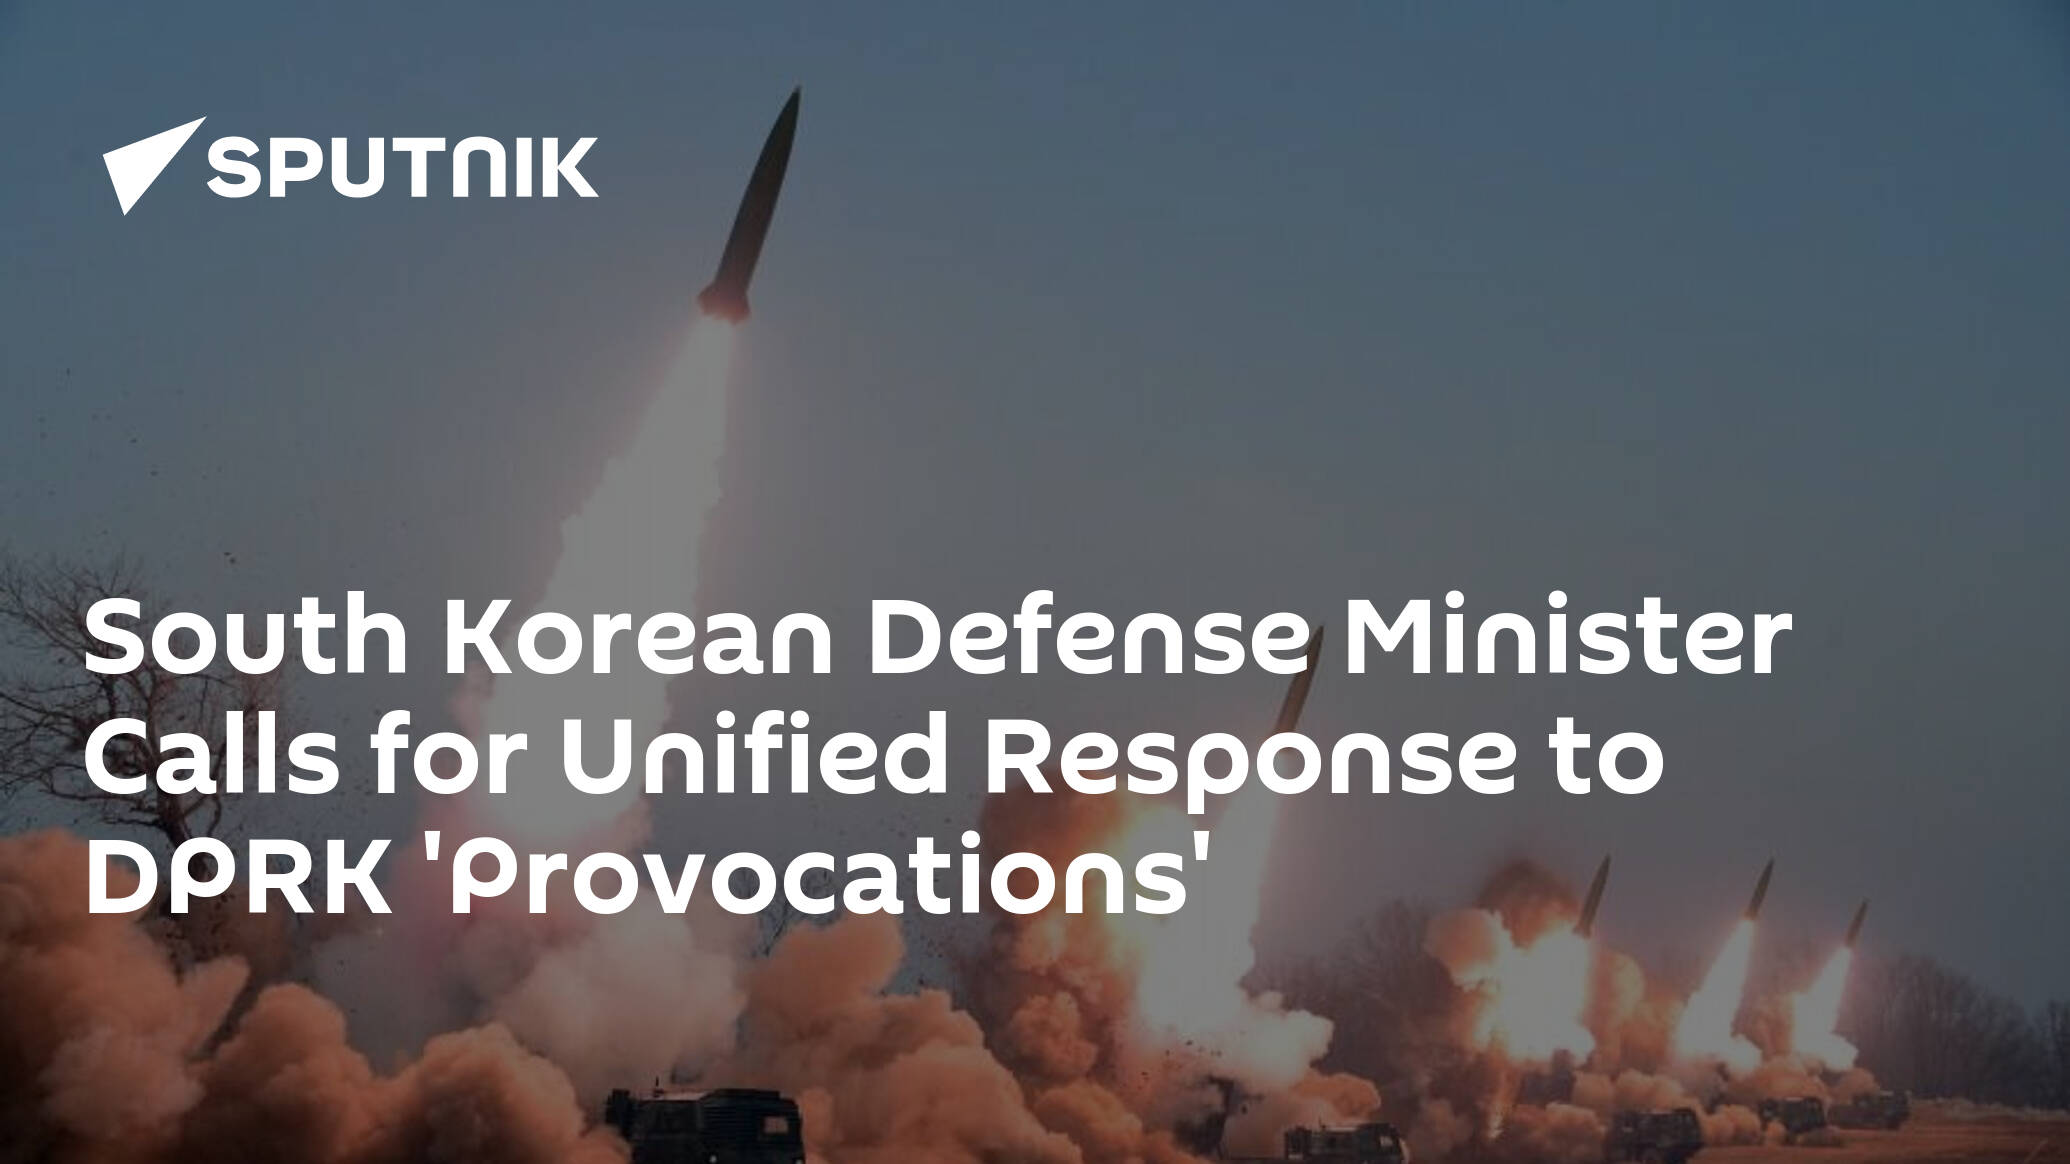 South Korean Defense Minister Calls for Unified Response to DPRK 'Provocations'